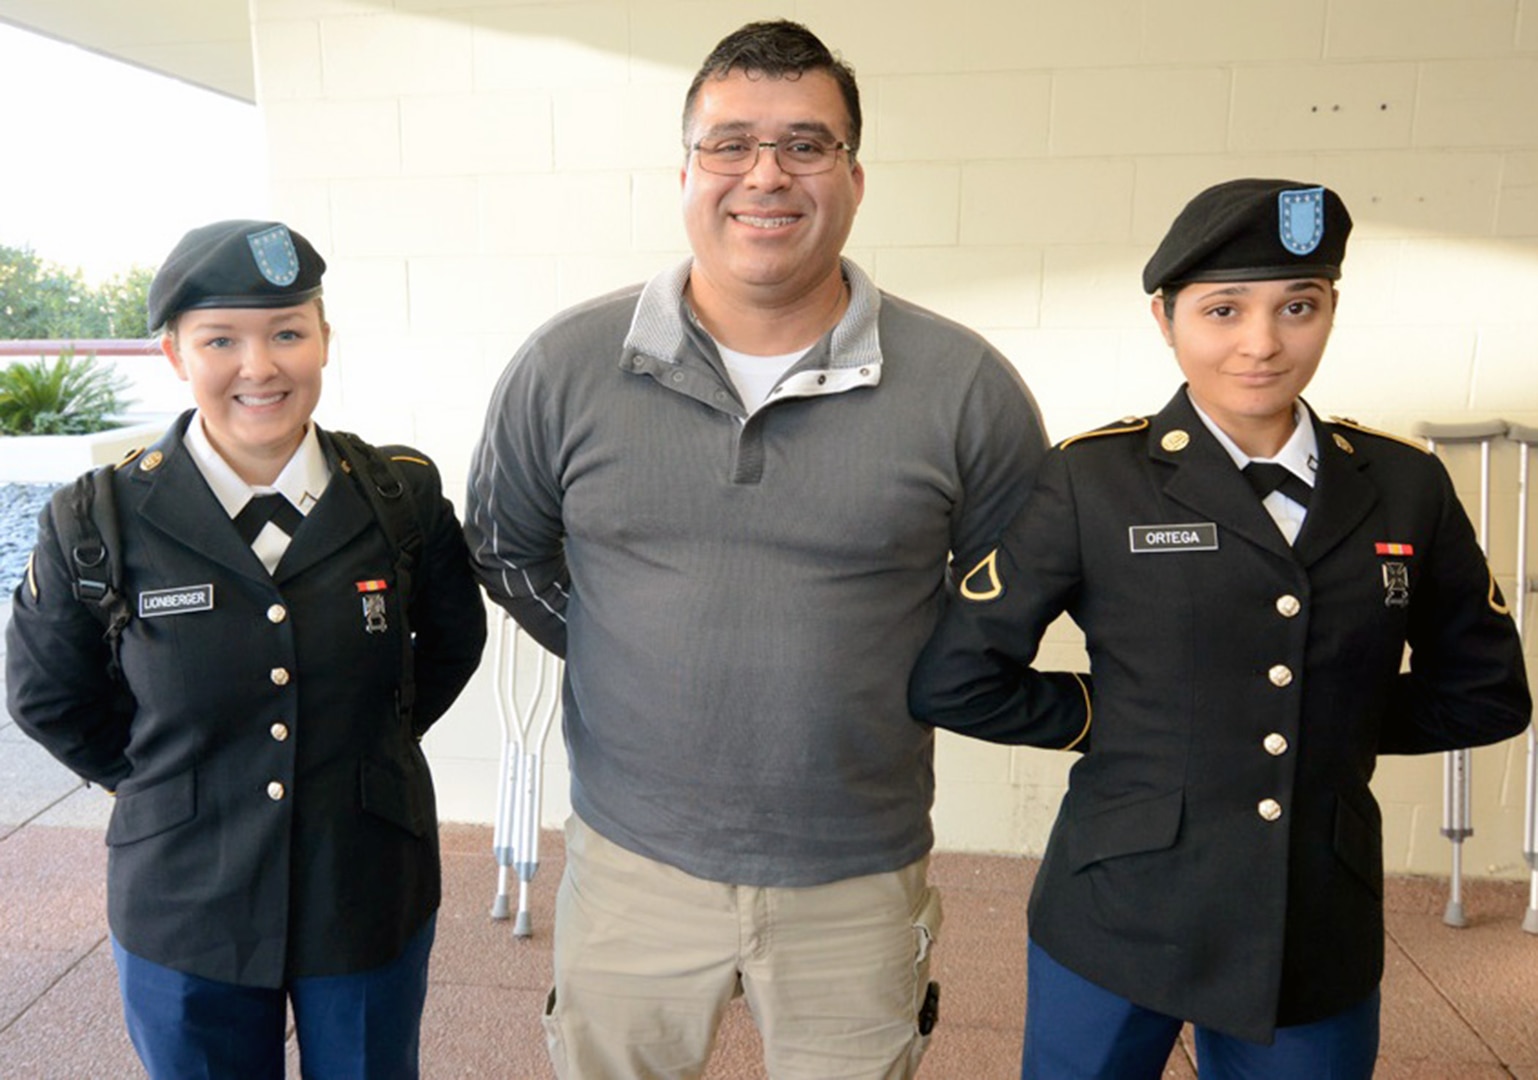 Jose Valdez, recently retired from the U. S. Navy, with Pvt. Cindy Lionberger from Ocean City, Md.; and Pvt. Samantha Ortega from the Bronx, N.Y.